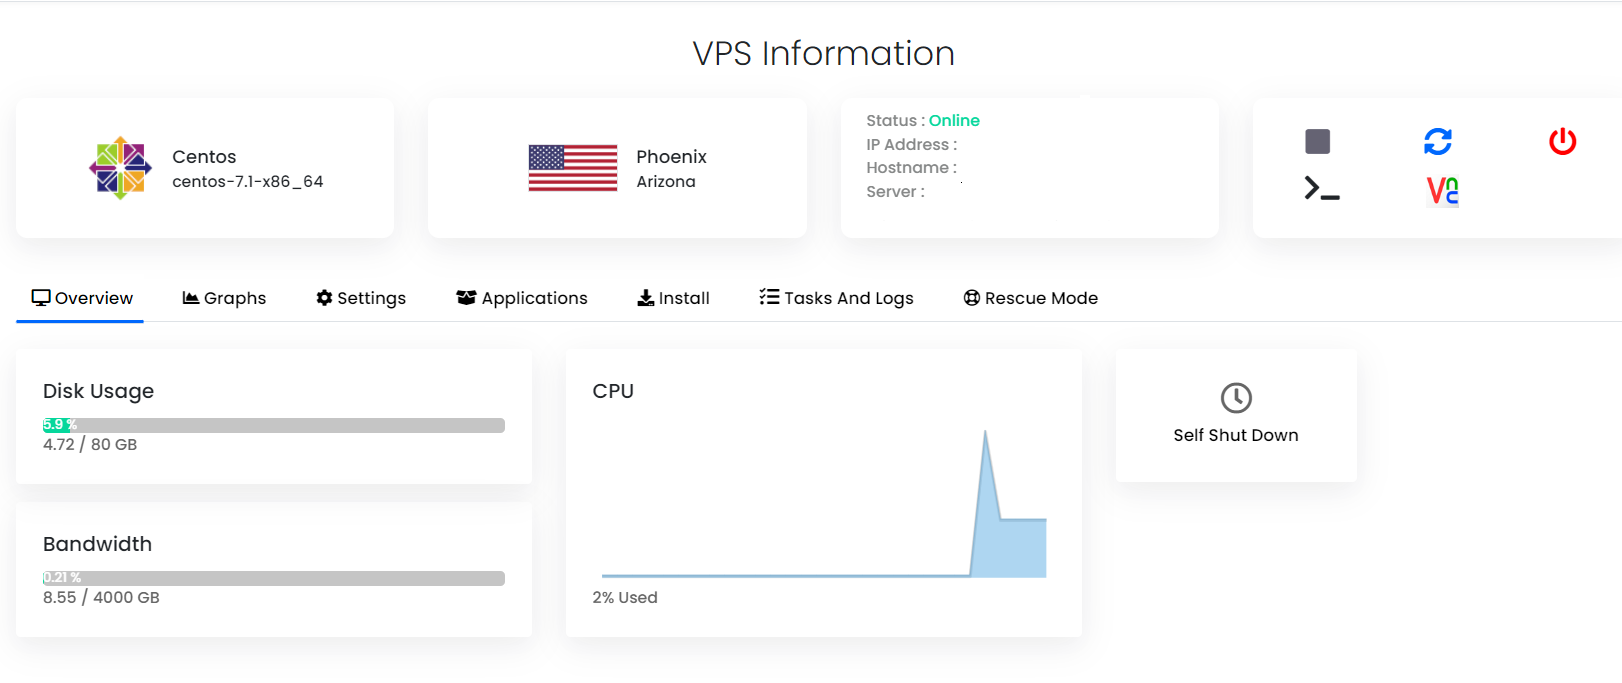 view VPS information